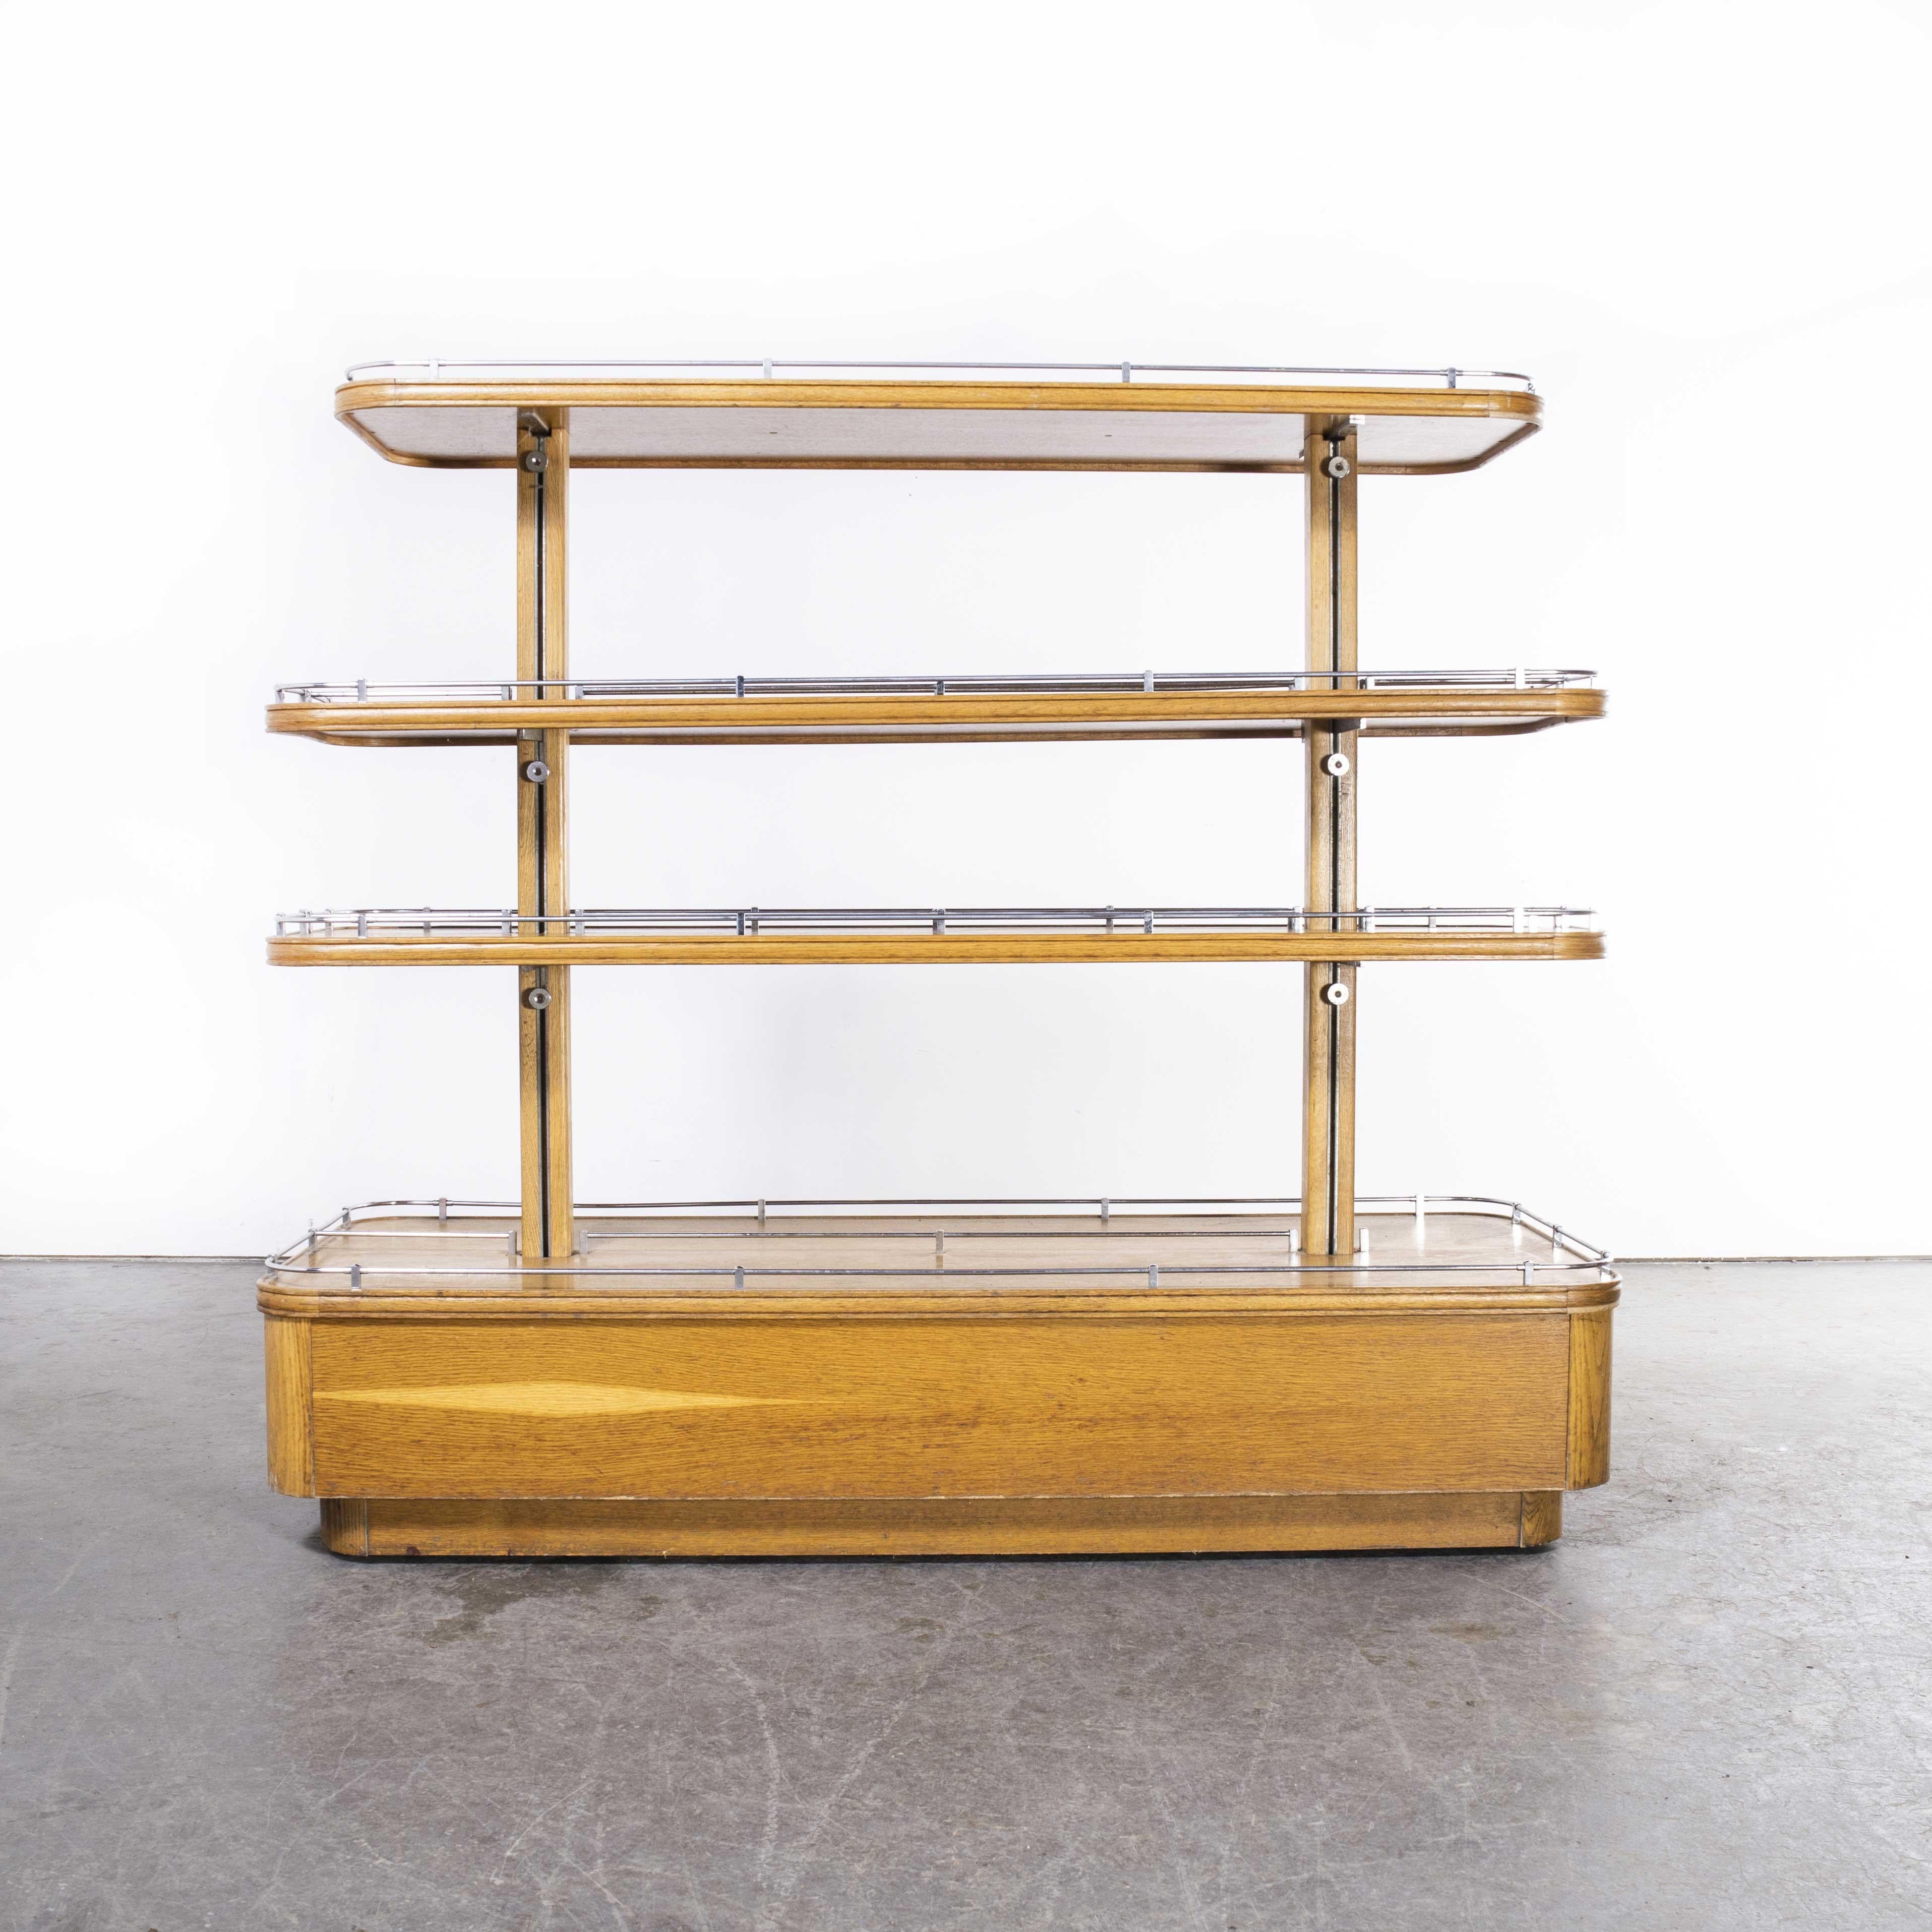 1950’s Original mid floor haberdashery display shelving stand (Model 1251).
1950’s Original mid floor haberdashery display shelving stand. Superb and unusual original shop fit shelving unit from the 1950’s. Made in solid bleached oak throughout the